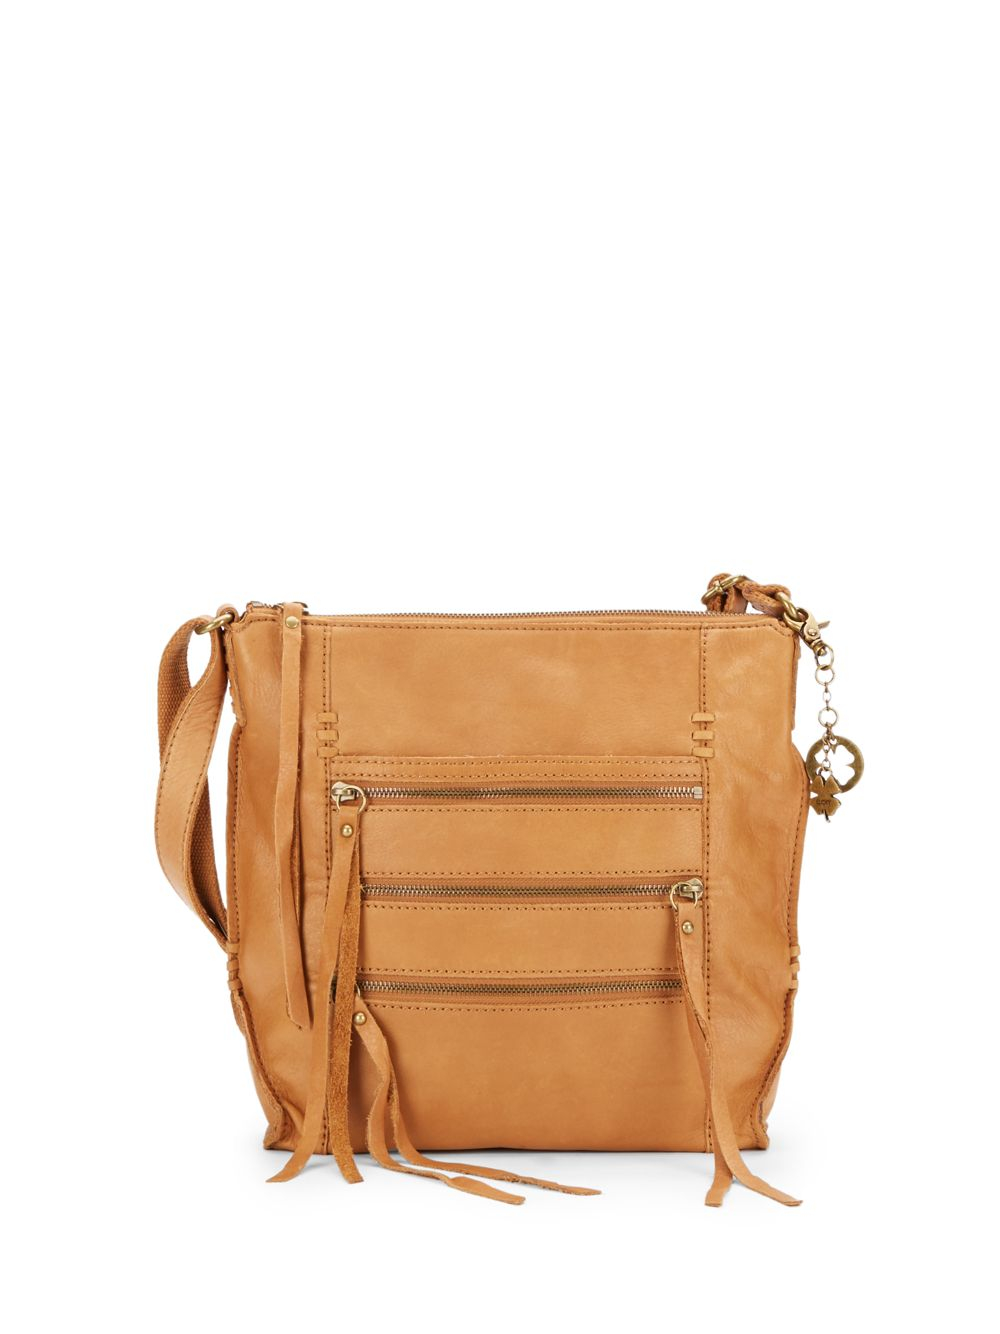 Lyst - Lucky Brand Shannon Leather Zip Crossbody Bag in Brown